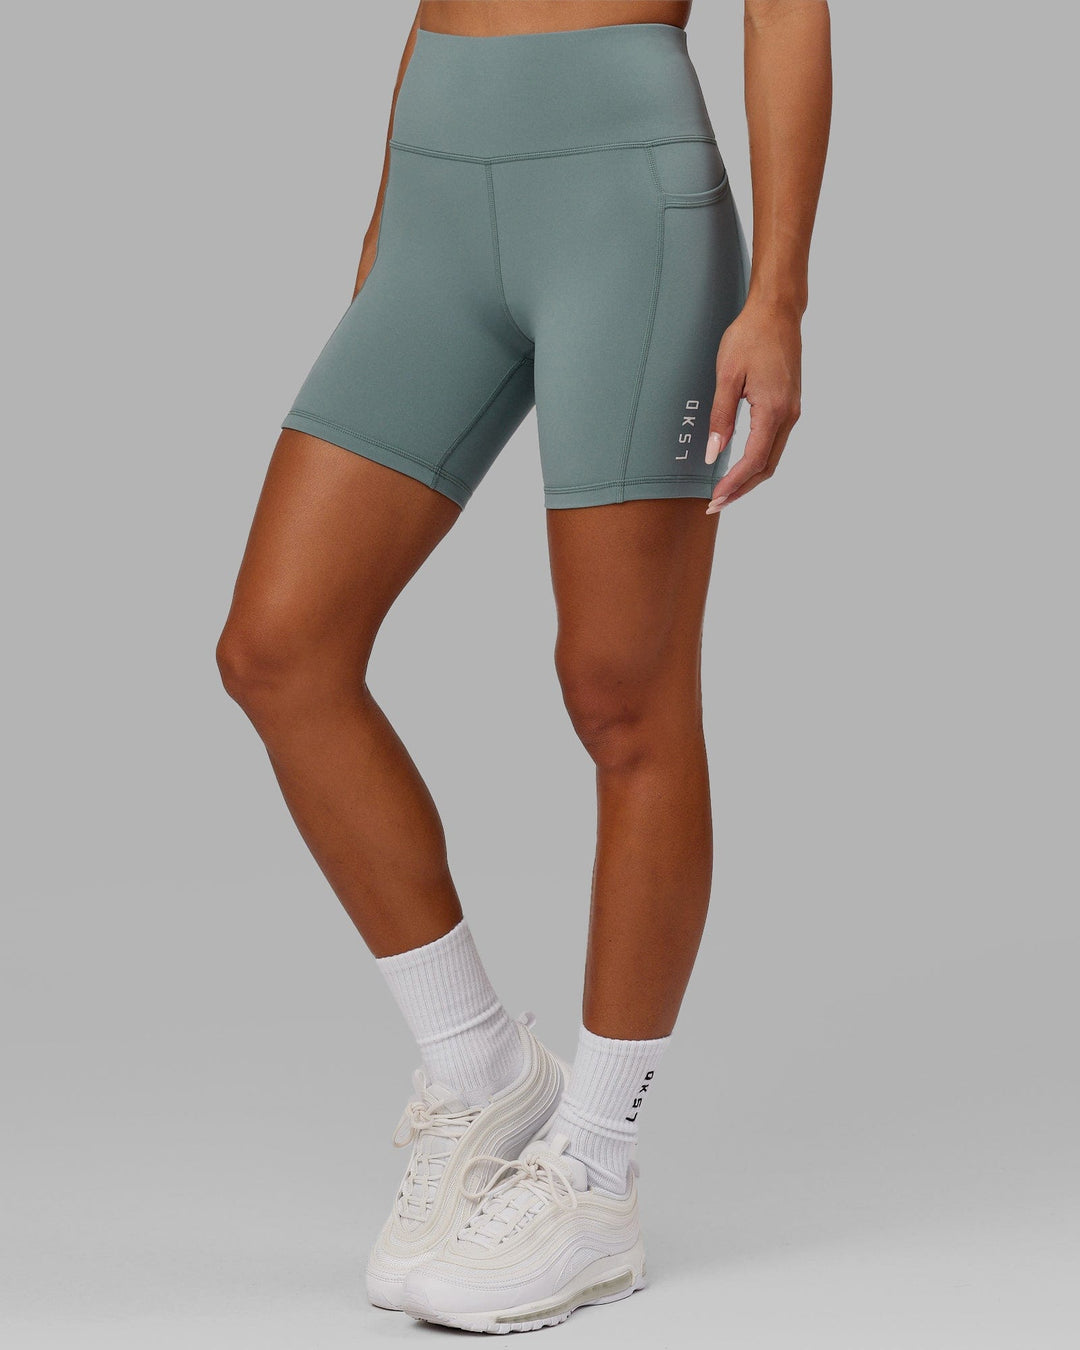 Woman wearing Rep Mid Short Tight Small Logo - Eclipse